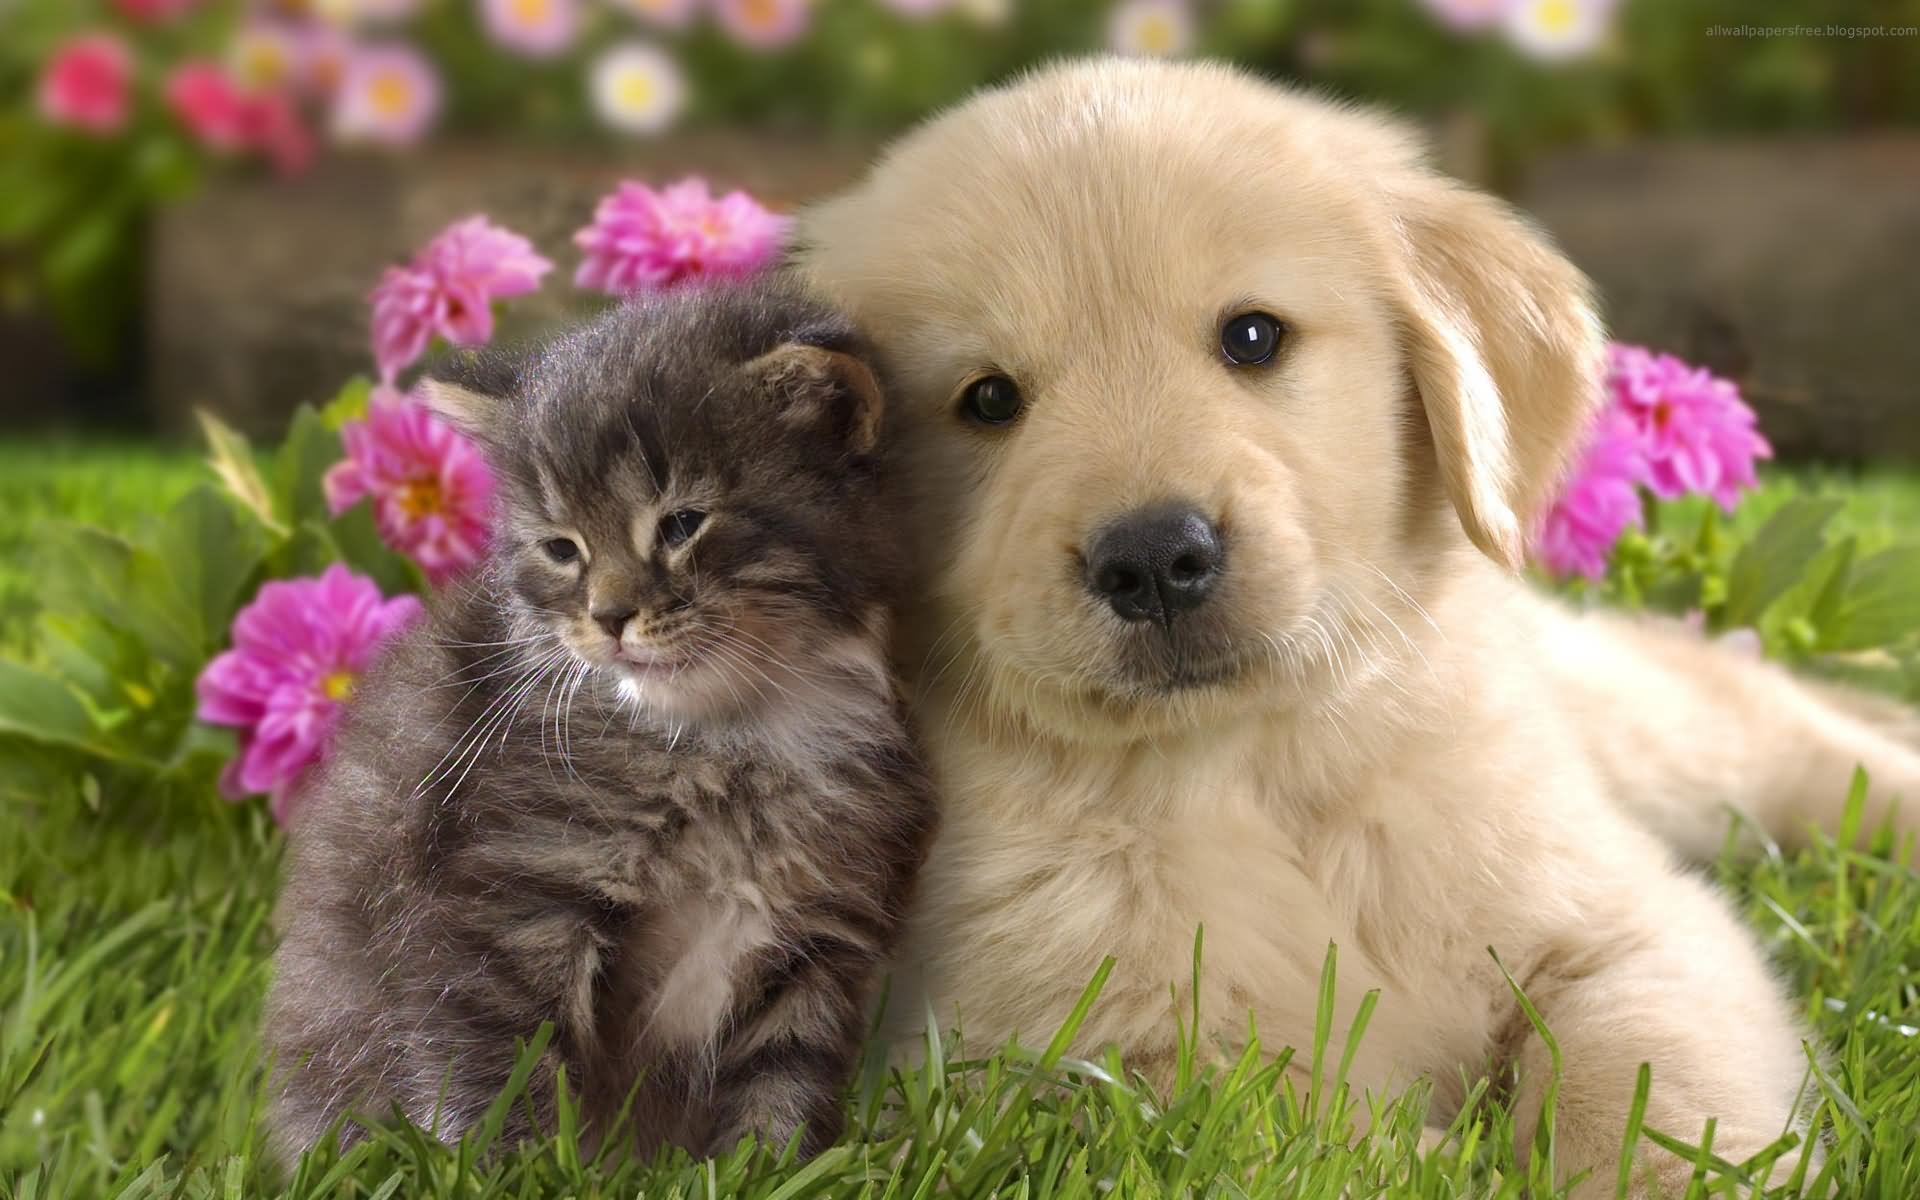 Dog And Cat Funny Friendship